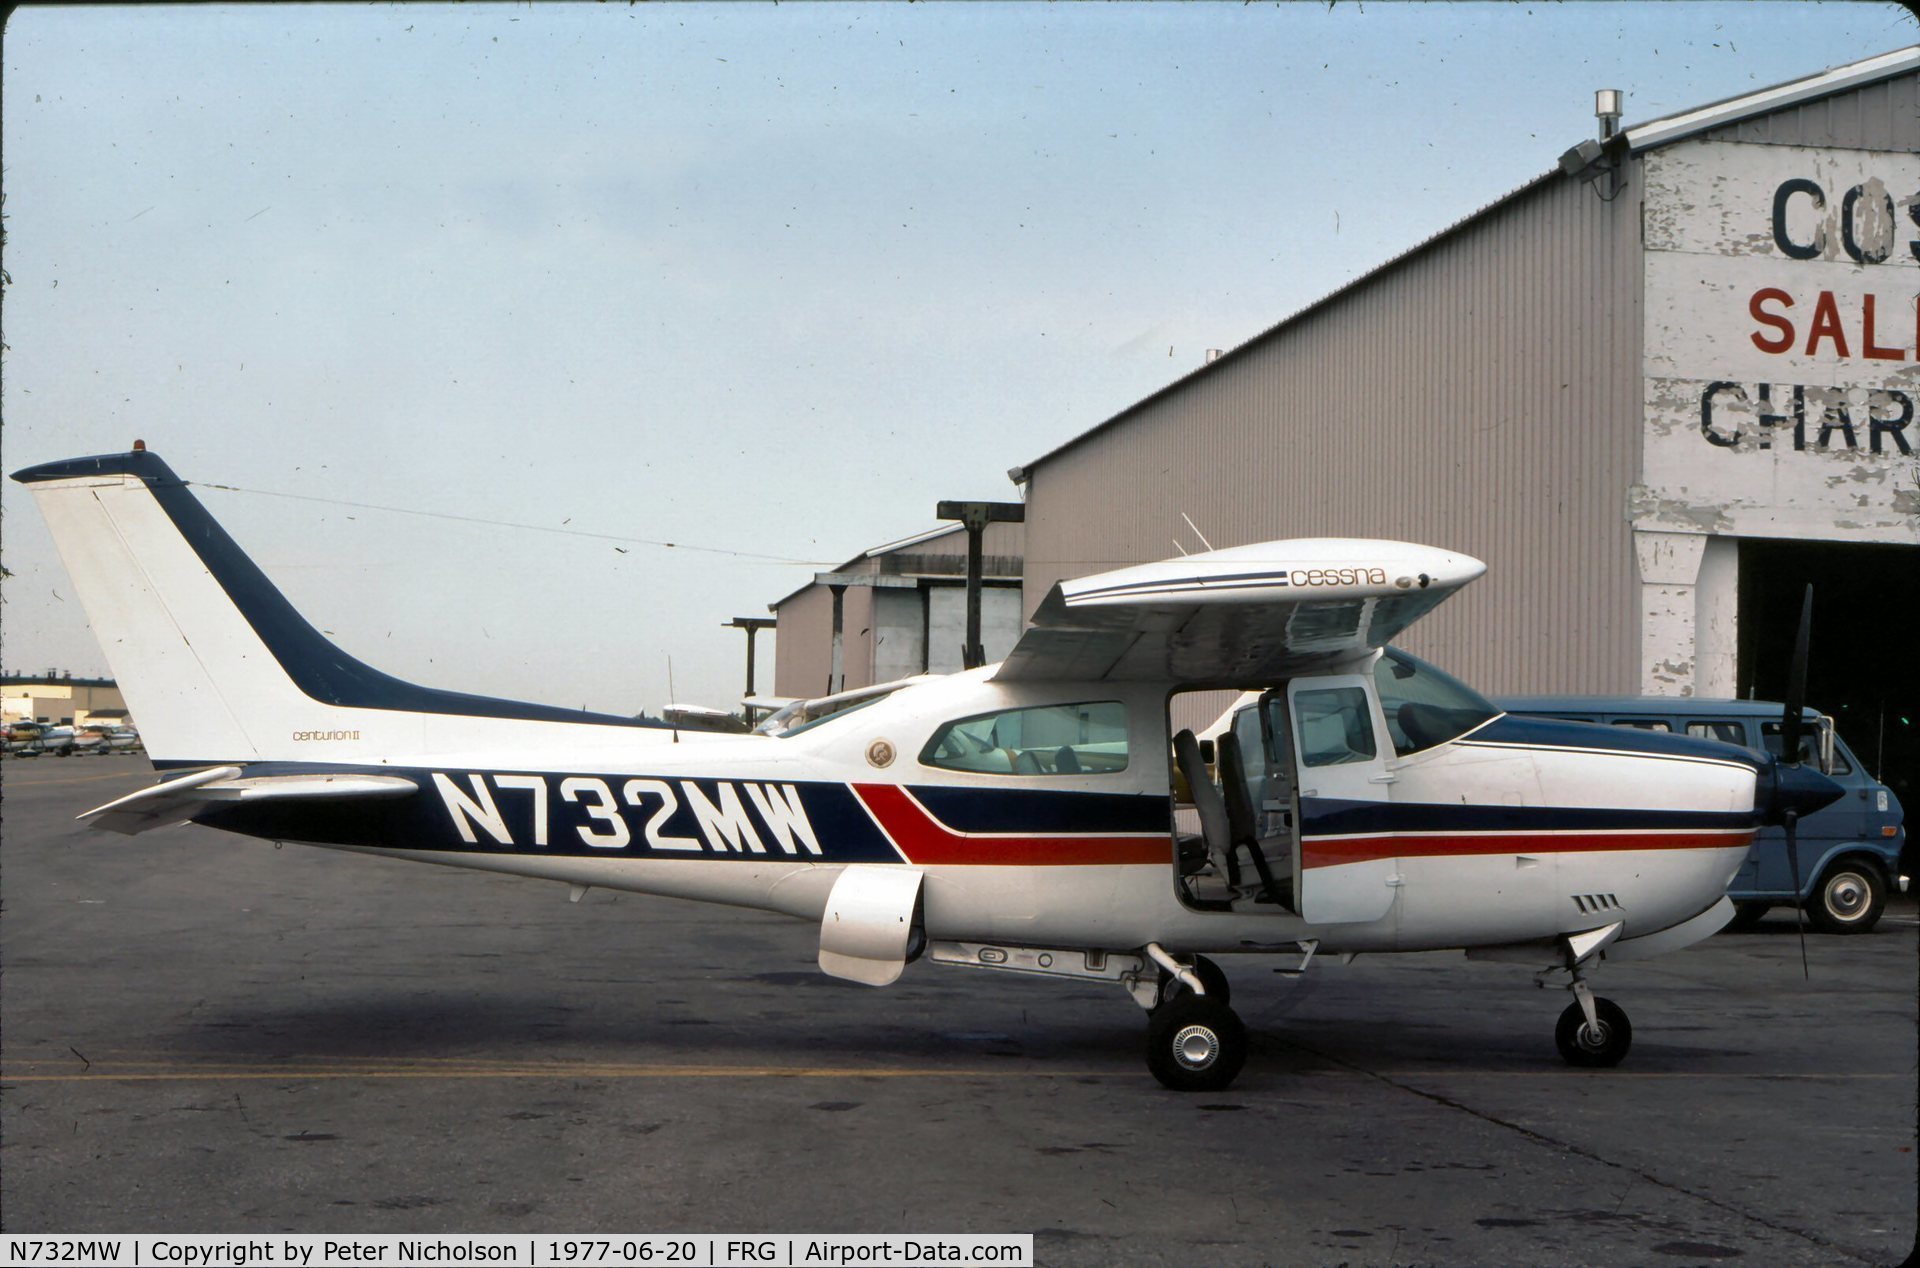 N732MW, 1976 Cessna 210M Centurion C/N 21061629, This Centurion II was seen at Republic Airport in the summer of 1977.